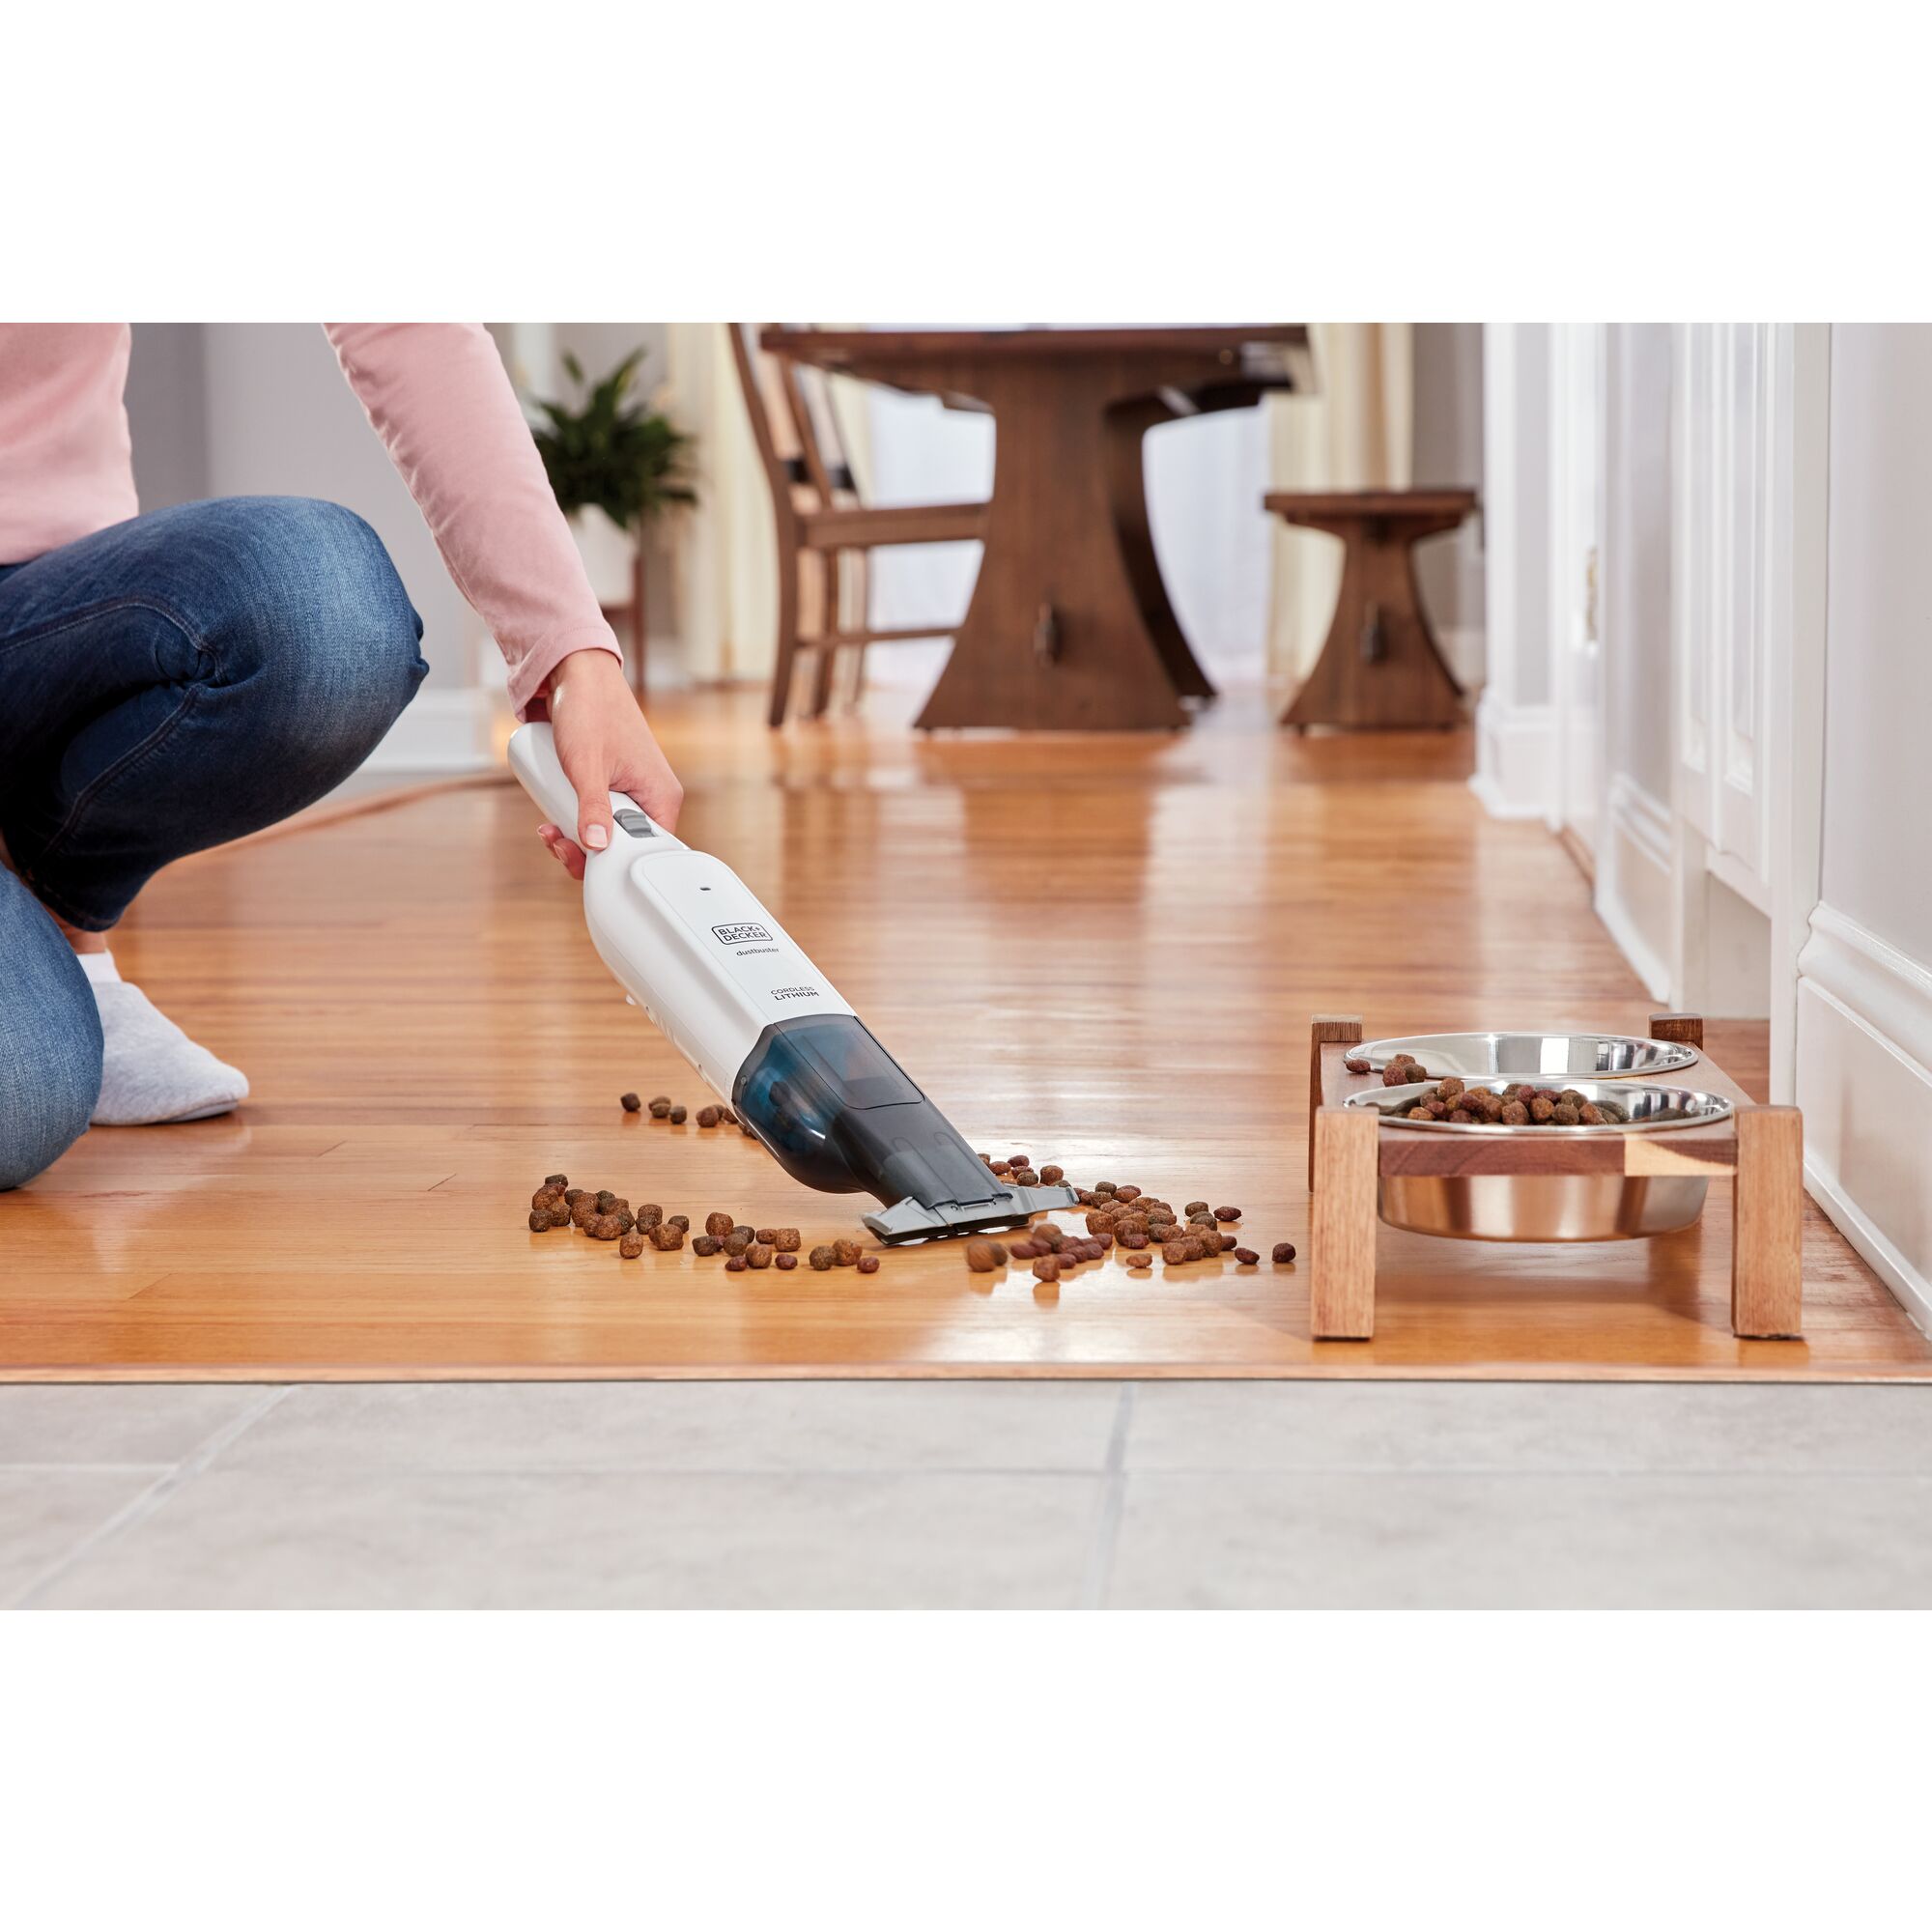 dustbuster AdvancedClean slim cordless handheld vacuum being used by a person to clean cat food spillage.\n